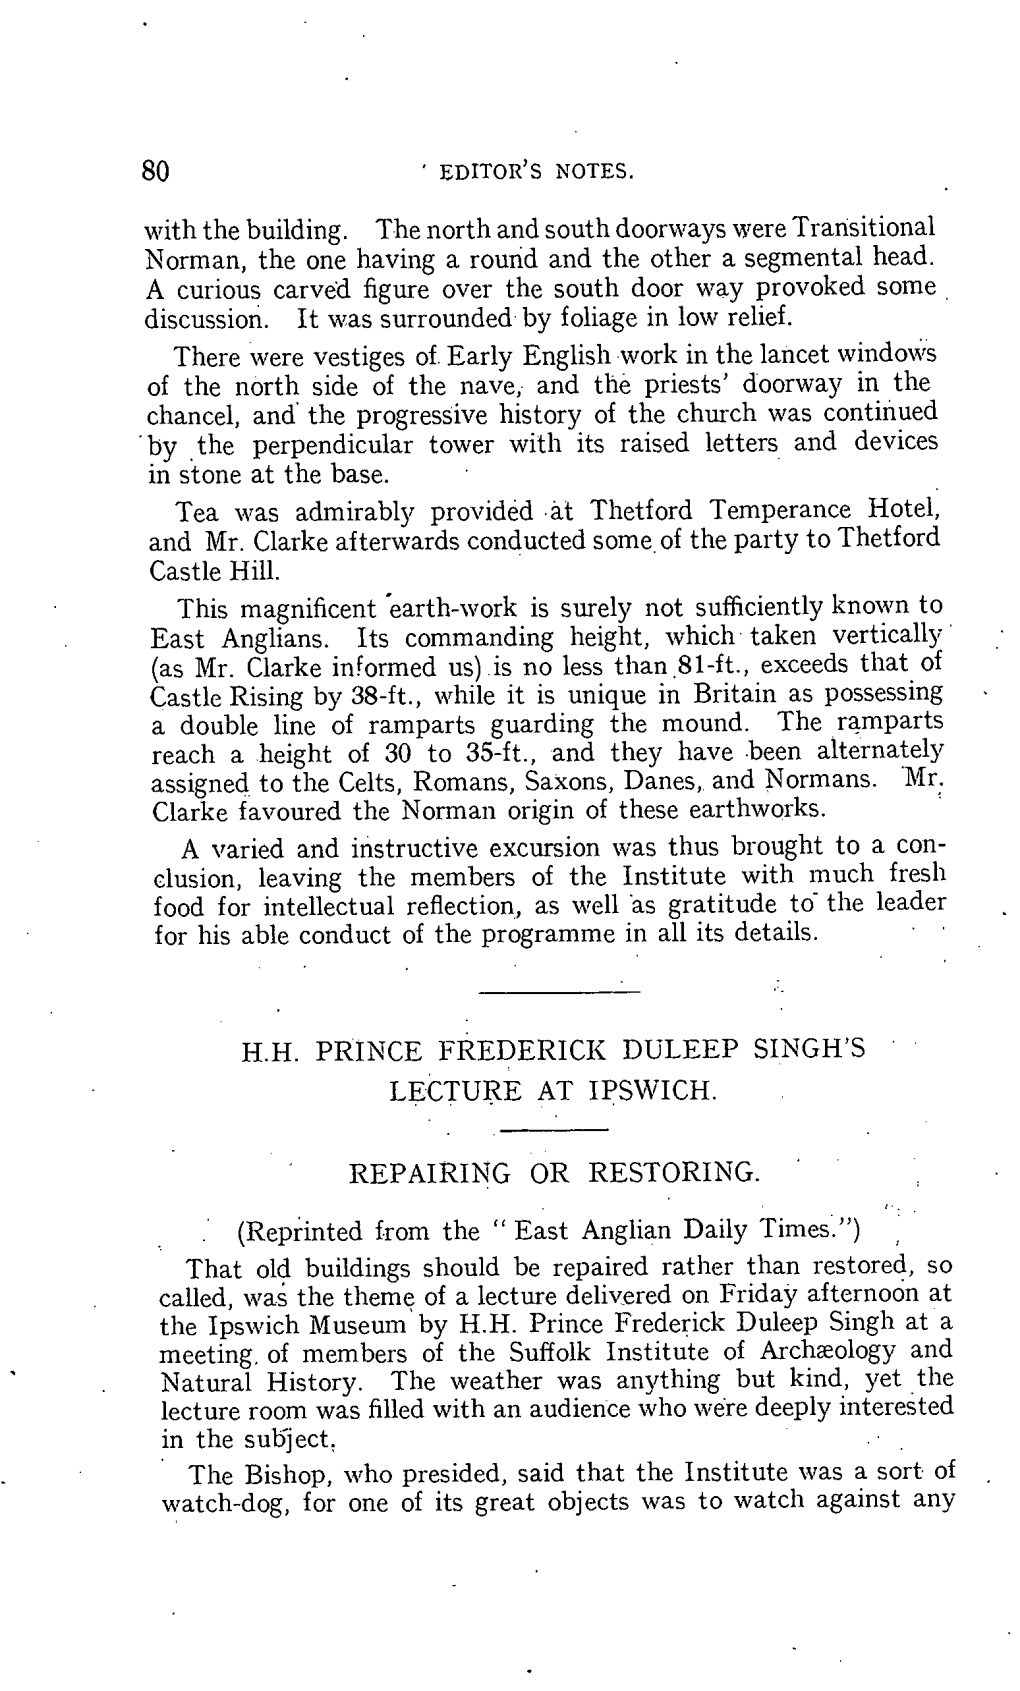 H.H. Prince Frederick Duleep Singh's Lecture at Ipswich